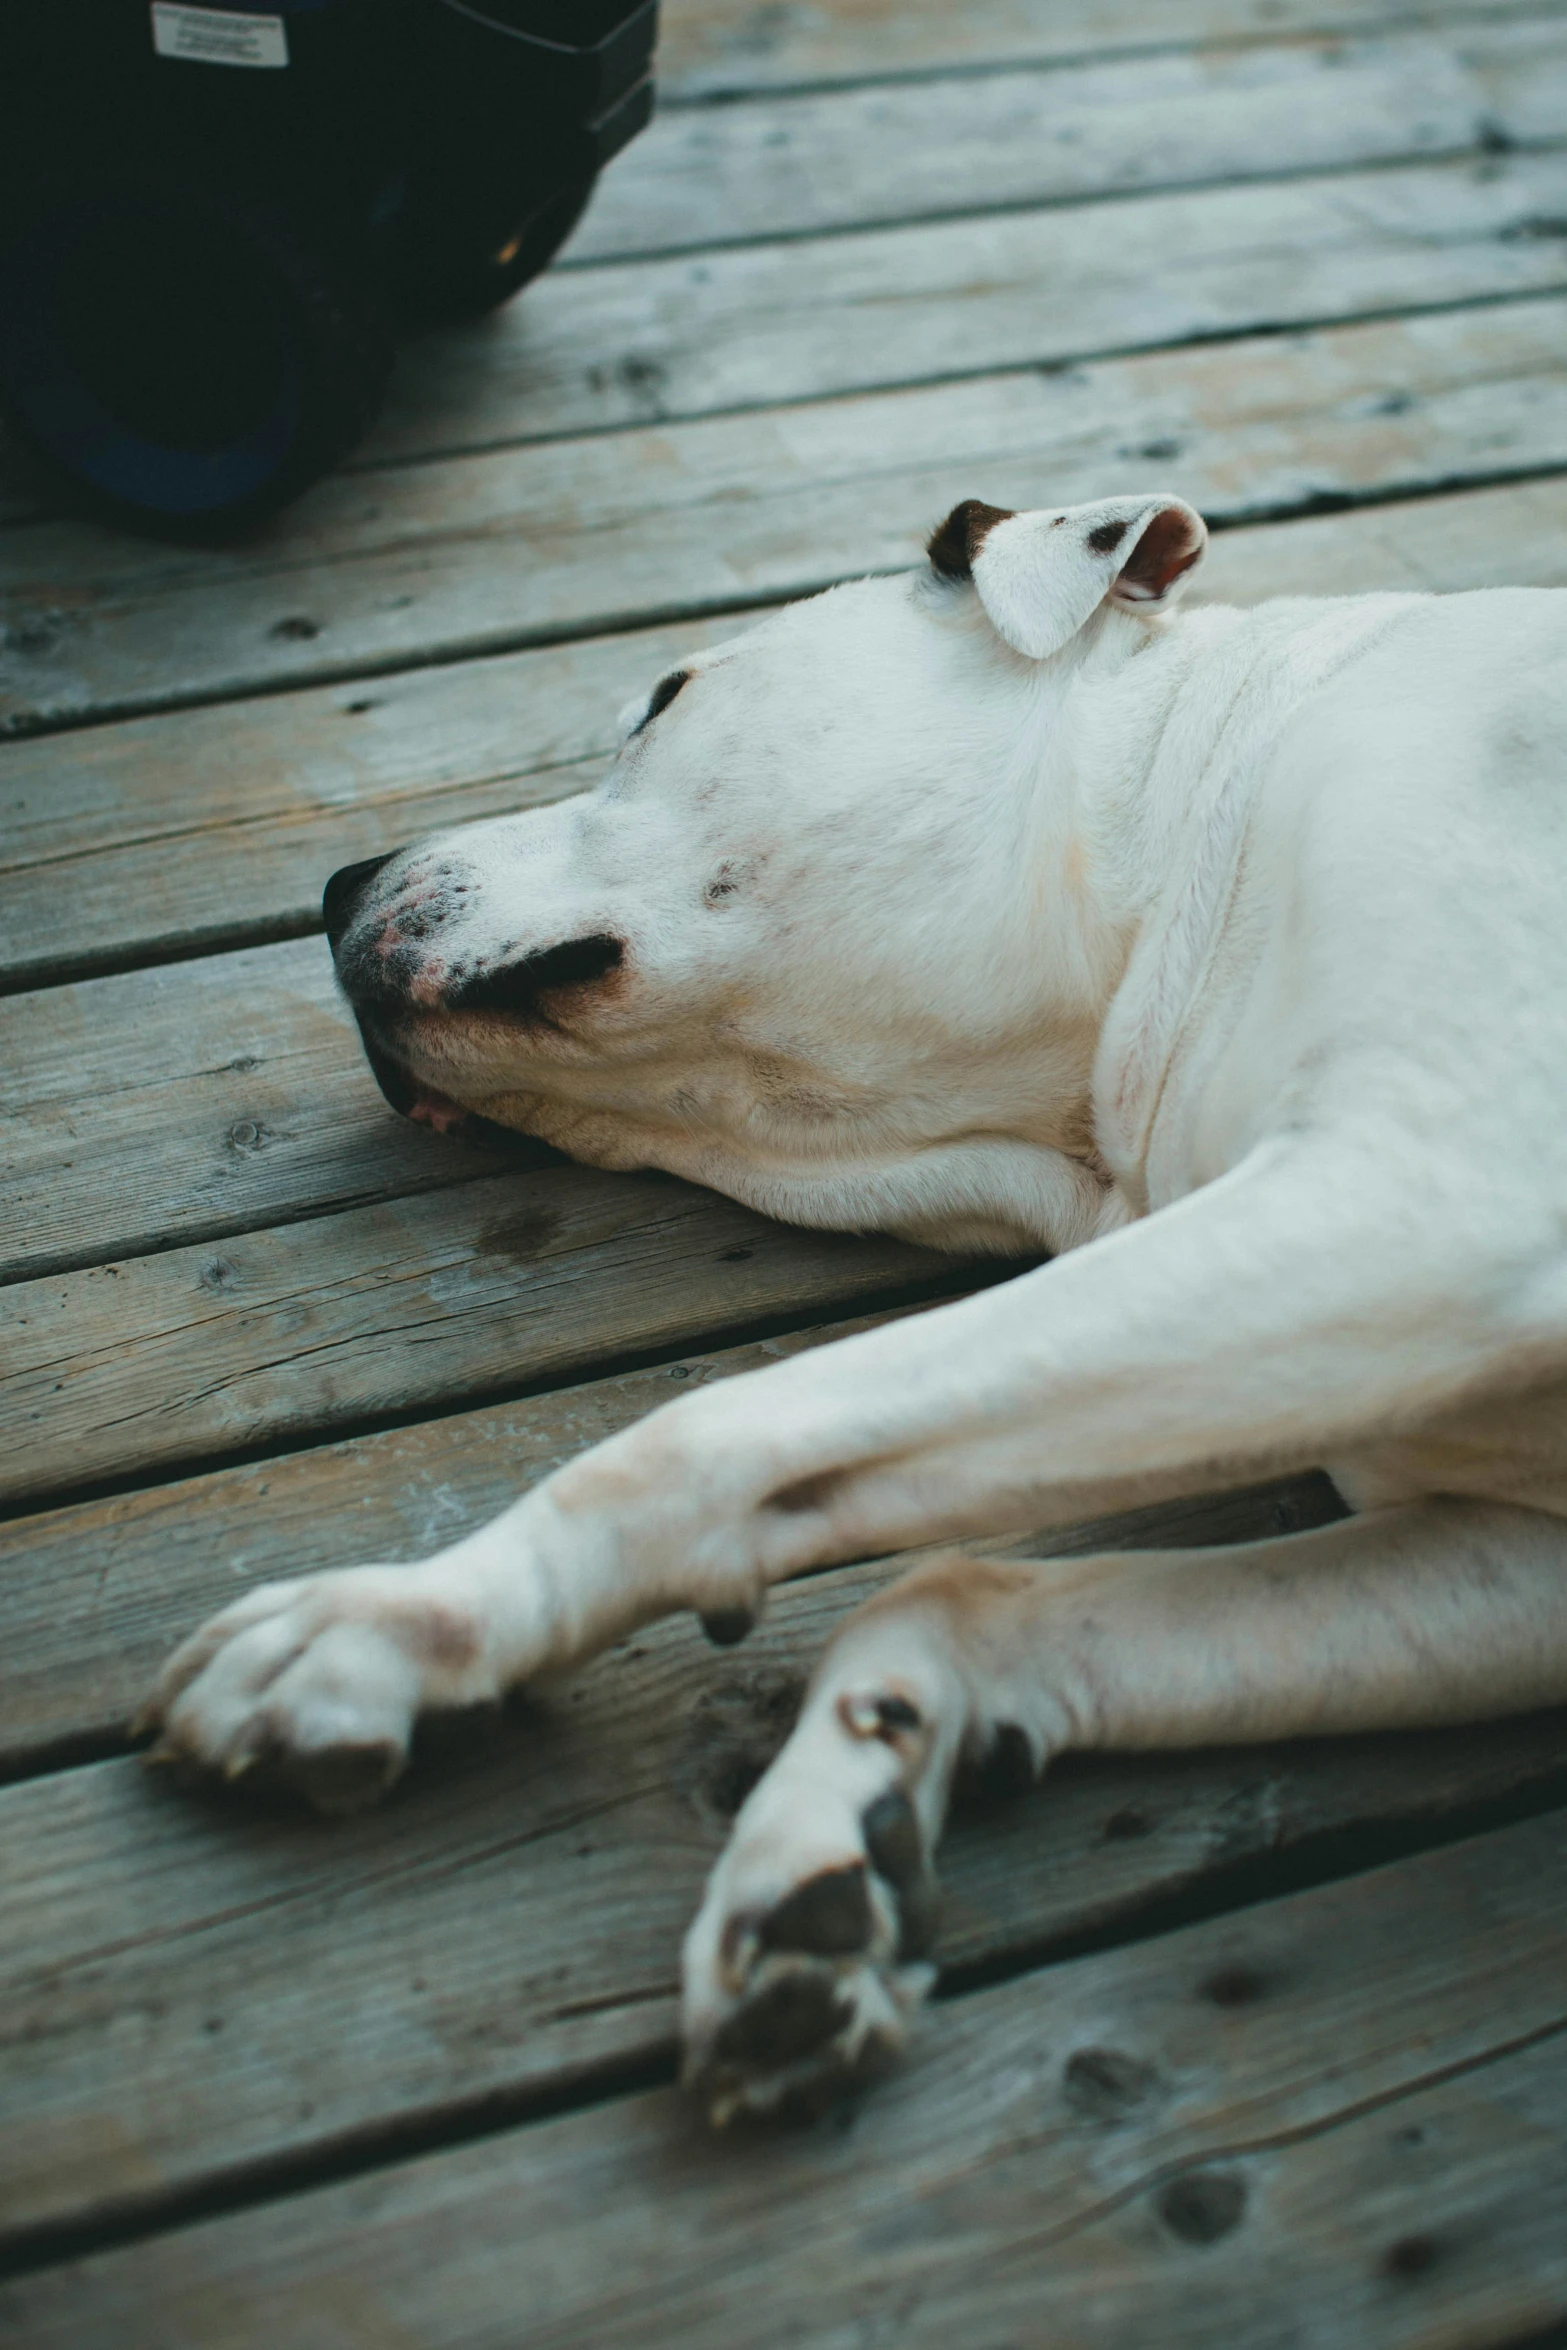 a close - up po of a dog sleeping on a wooden deck